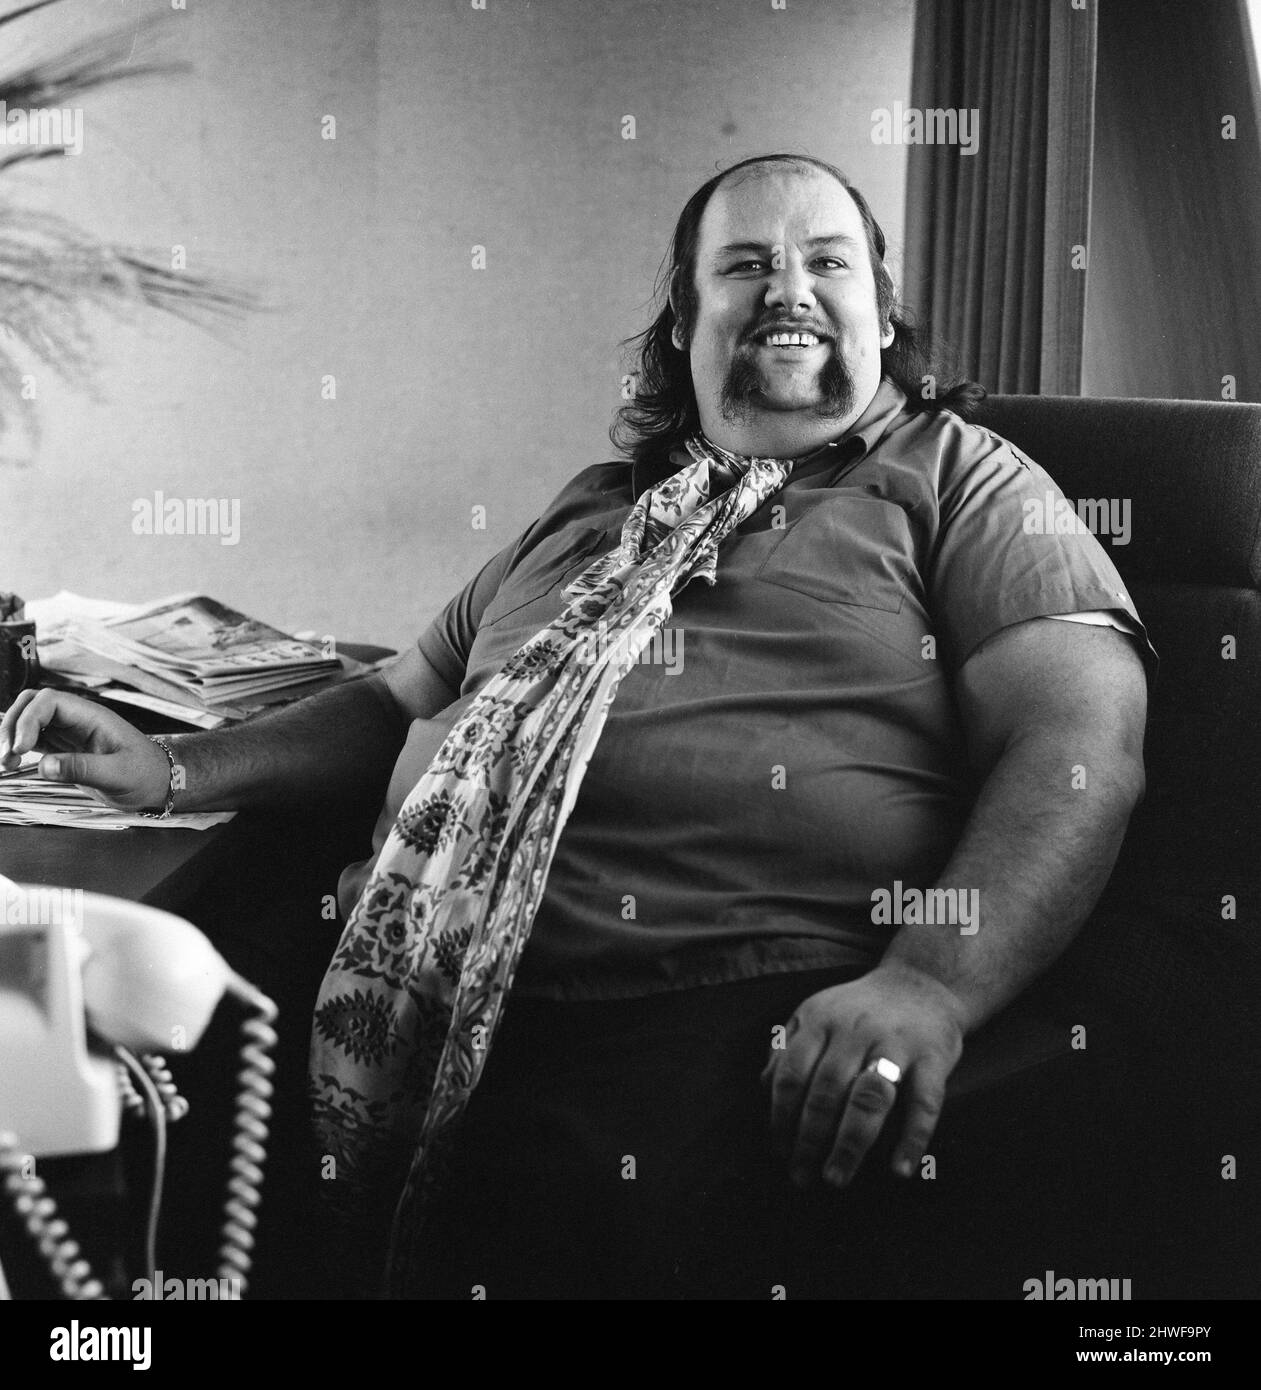 Peter Grant, Manager of Led Zeppelin, pictured in his office, Friday 9th  October 1970 Stock Photo - Alamy